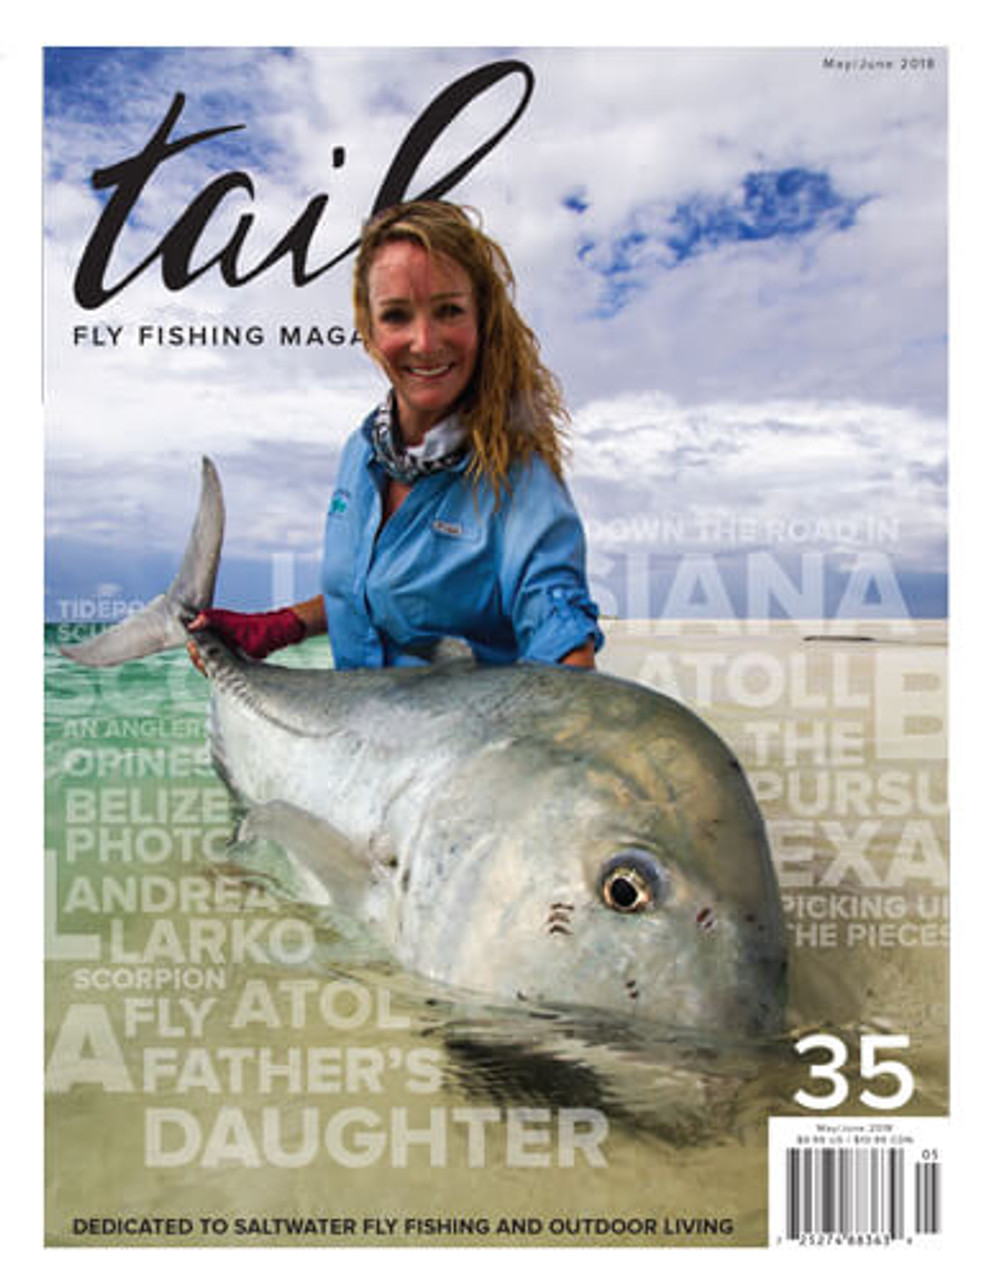 Tail Fly Fishing Magazine - Issue 35 